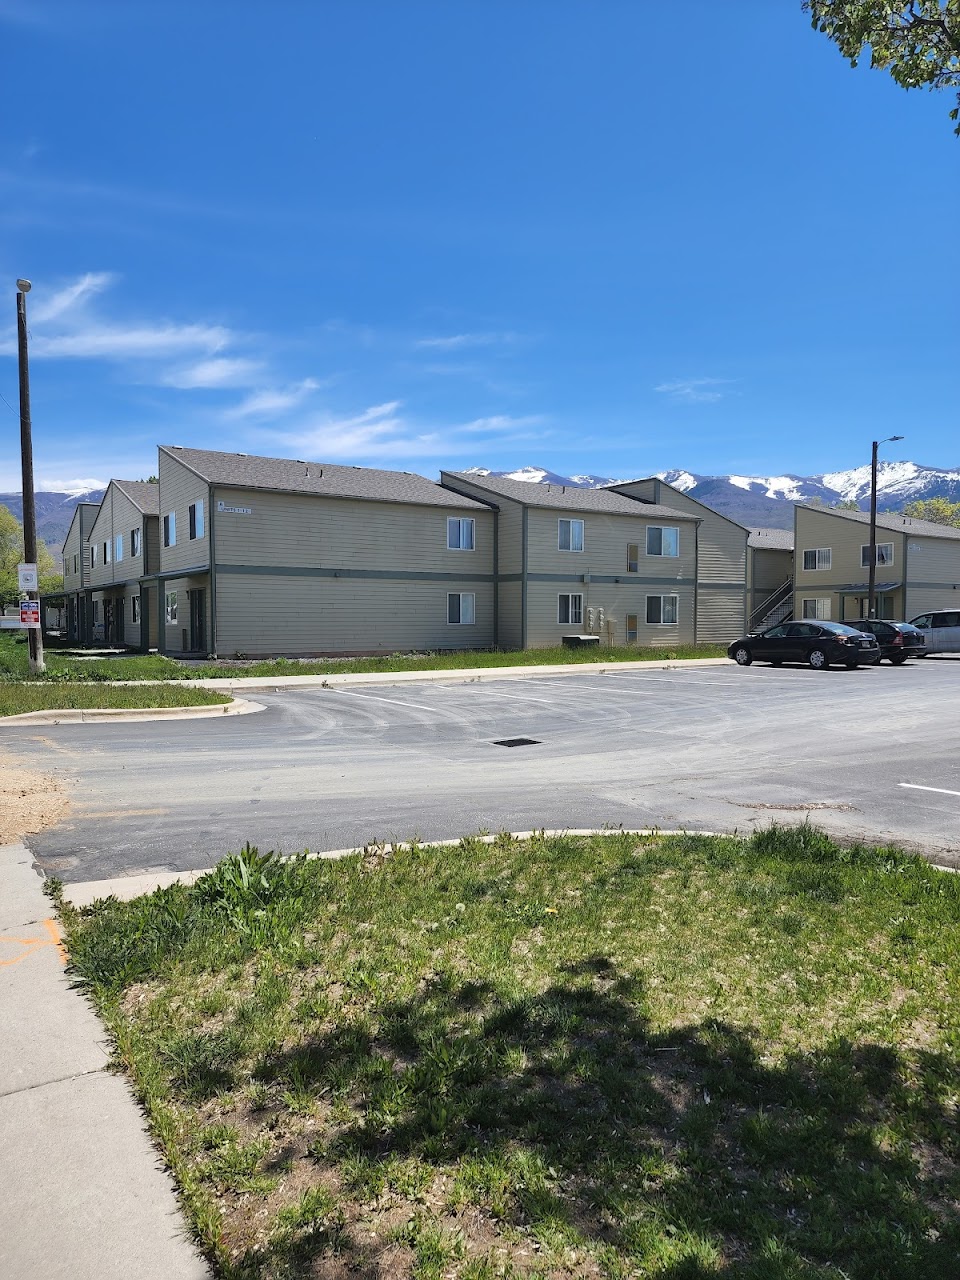 Photo of FRANCIS PEAK VIEW. Affordable housing located at 600 W. MUTTON HOLLOW KAYSVILLE, UT 84037